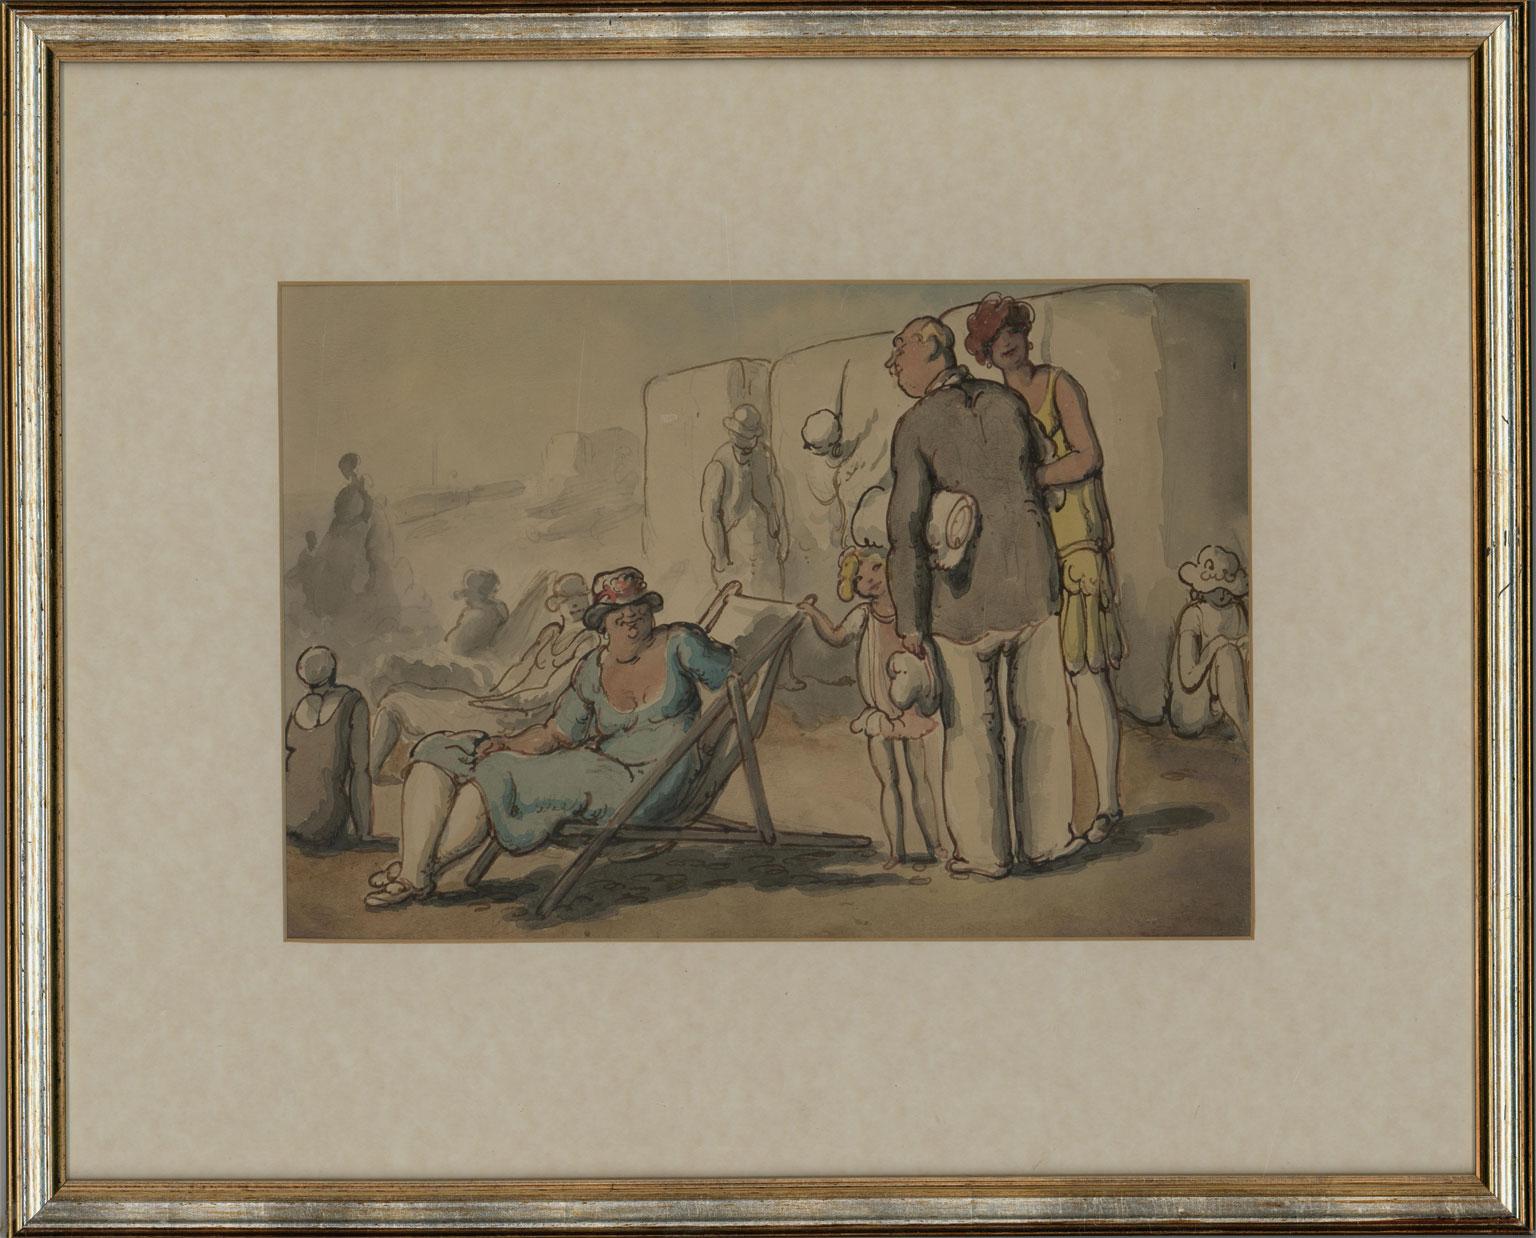 A beautifully observed study of holiday makers on an English beach by Harold Hope Read, painted in the artist's typical narrative style. This is a wonderful example of Hope Read's beach scenes, many of which are featured in our collection. His